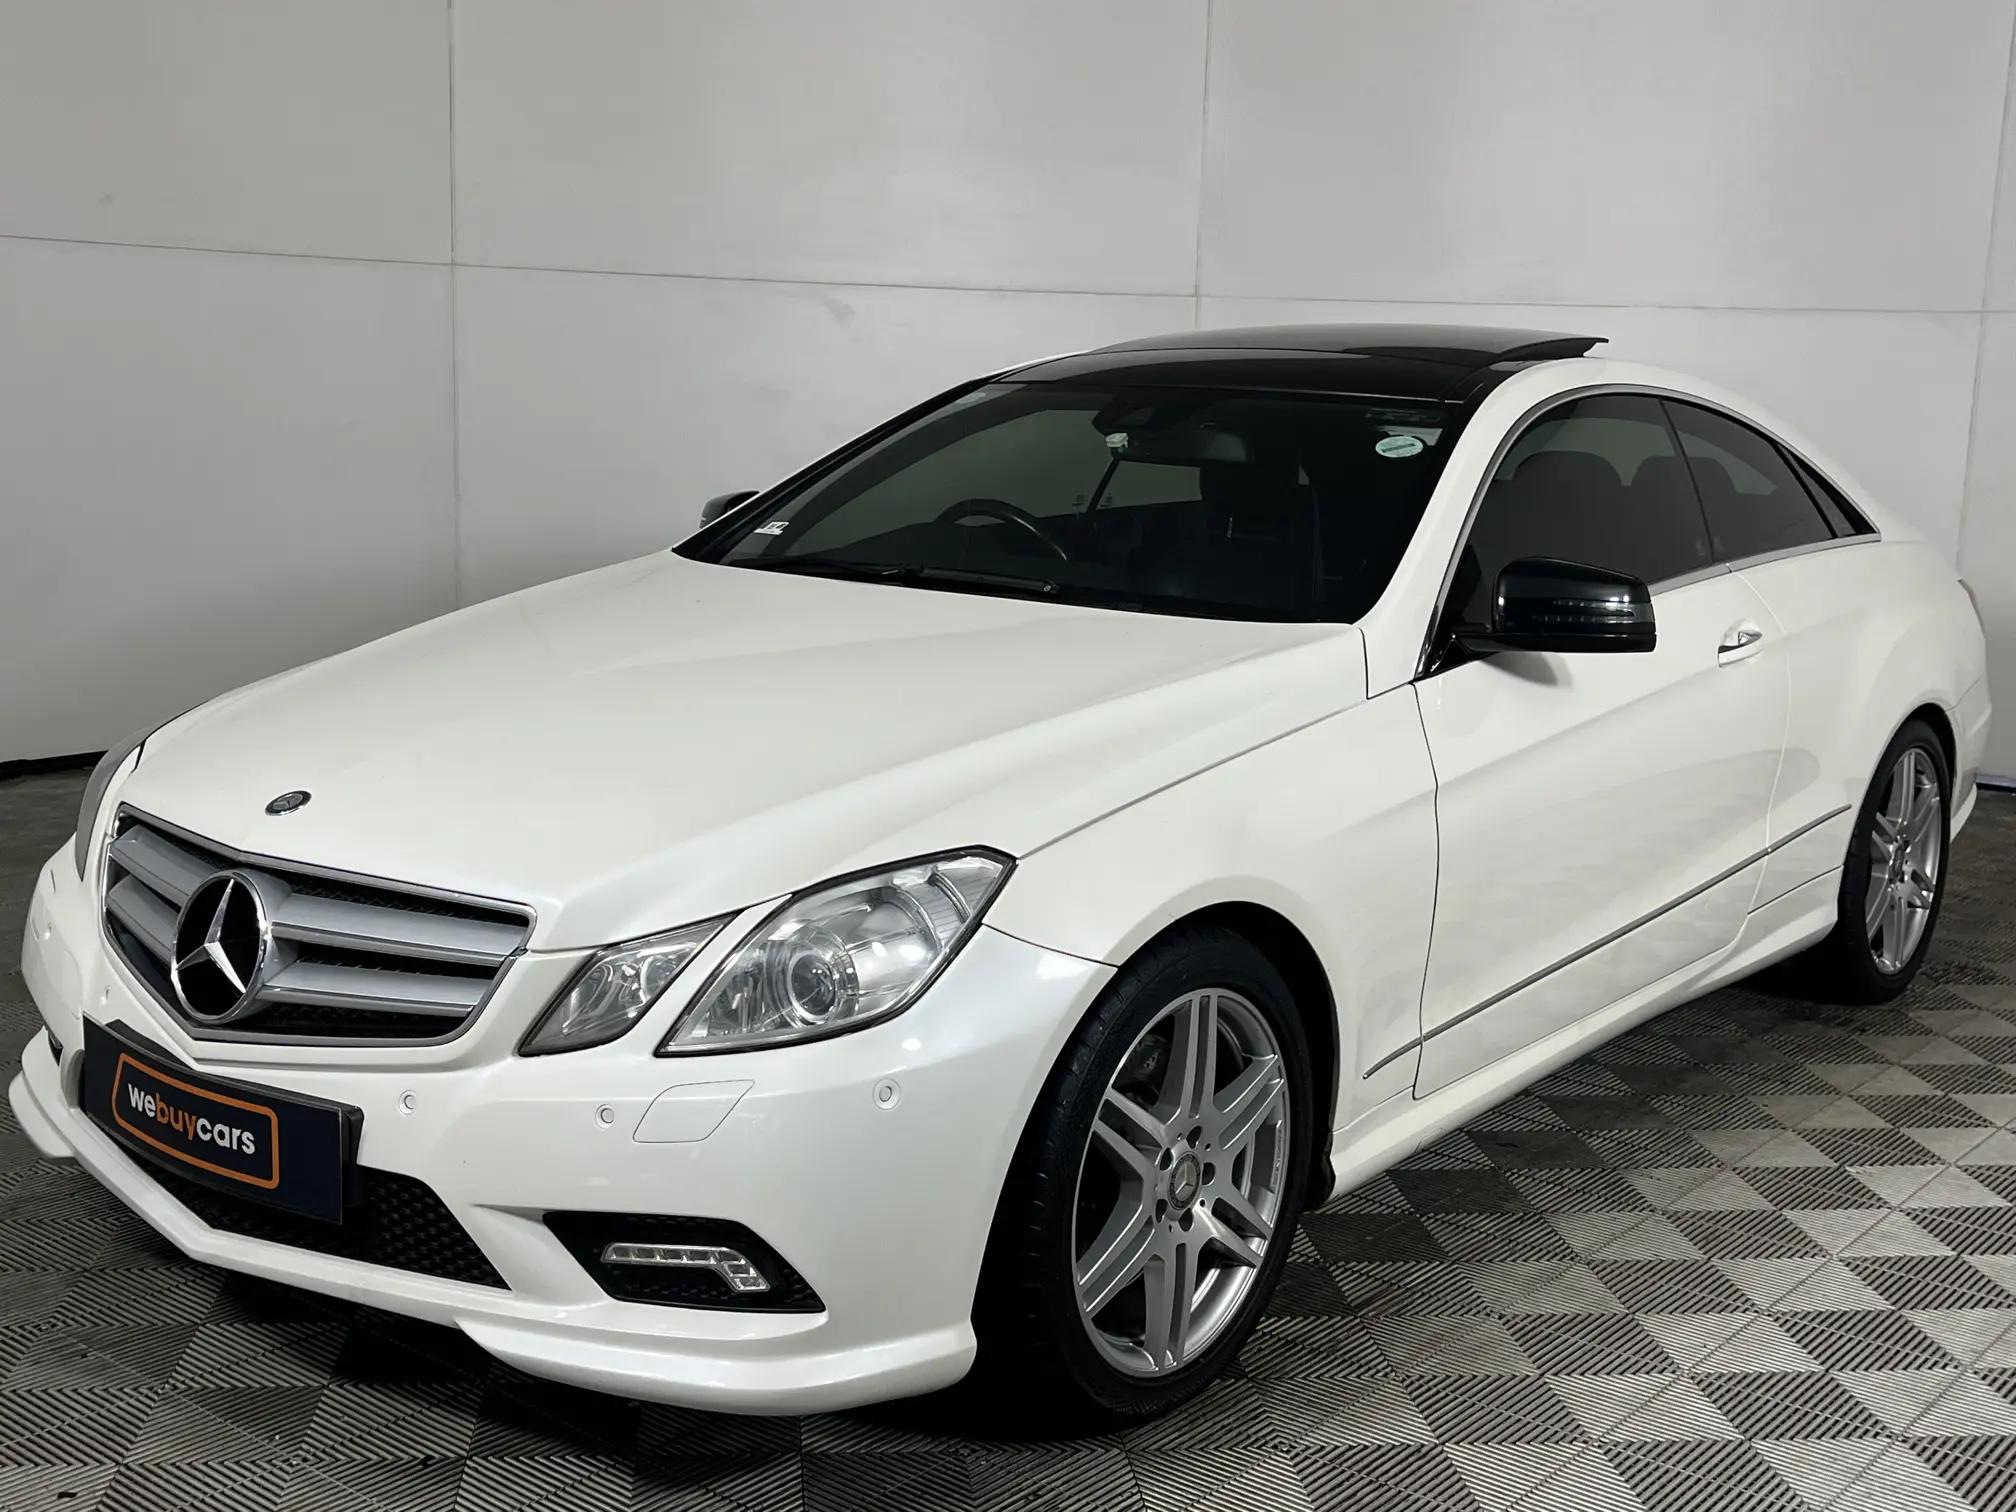 Mercedes Benz E 500 (285 kW) Coupe 7G-Tronic